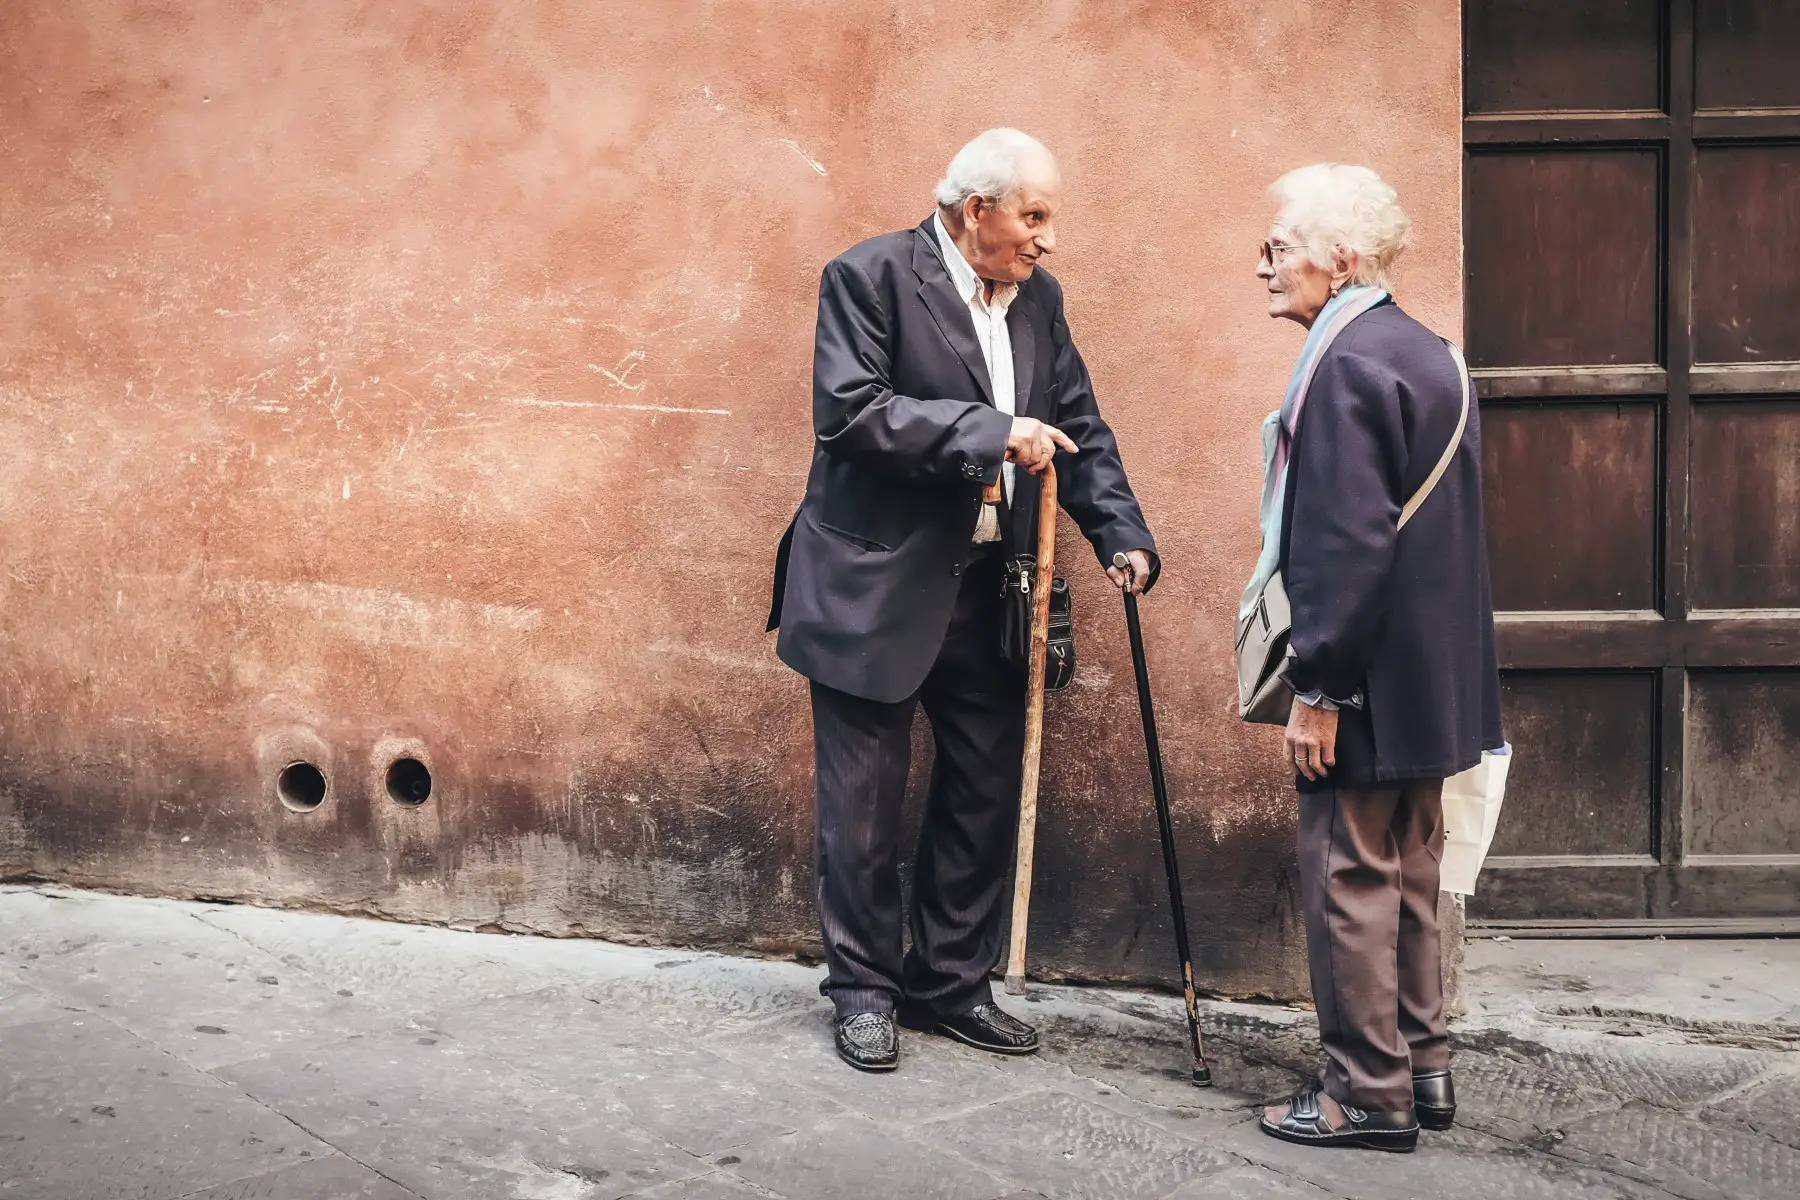 Two older Italian adults stop to have a conversation on the streets of Sienna, Italy.